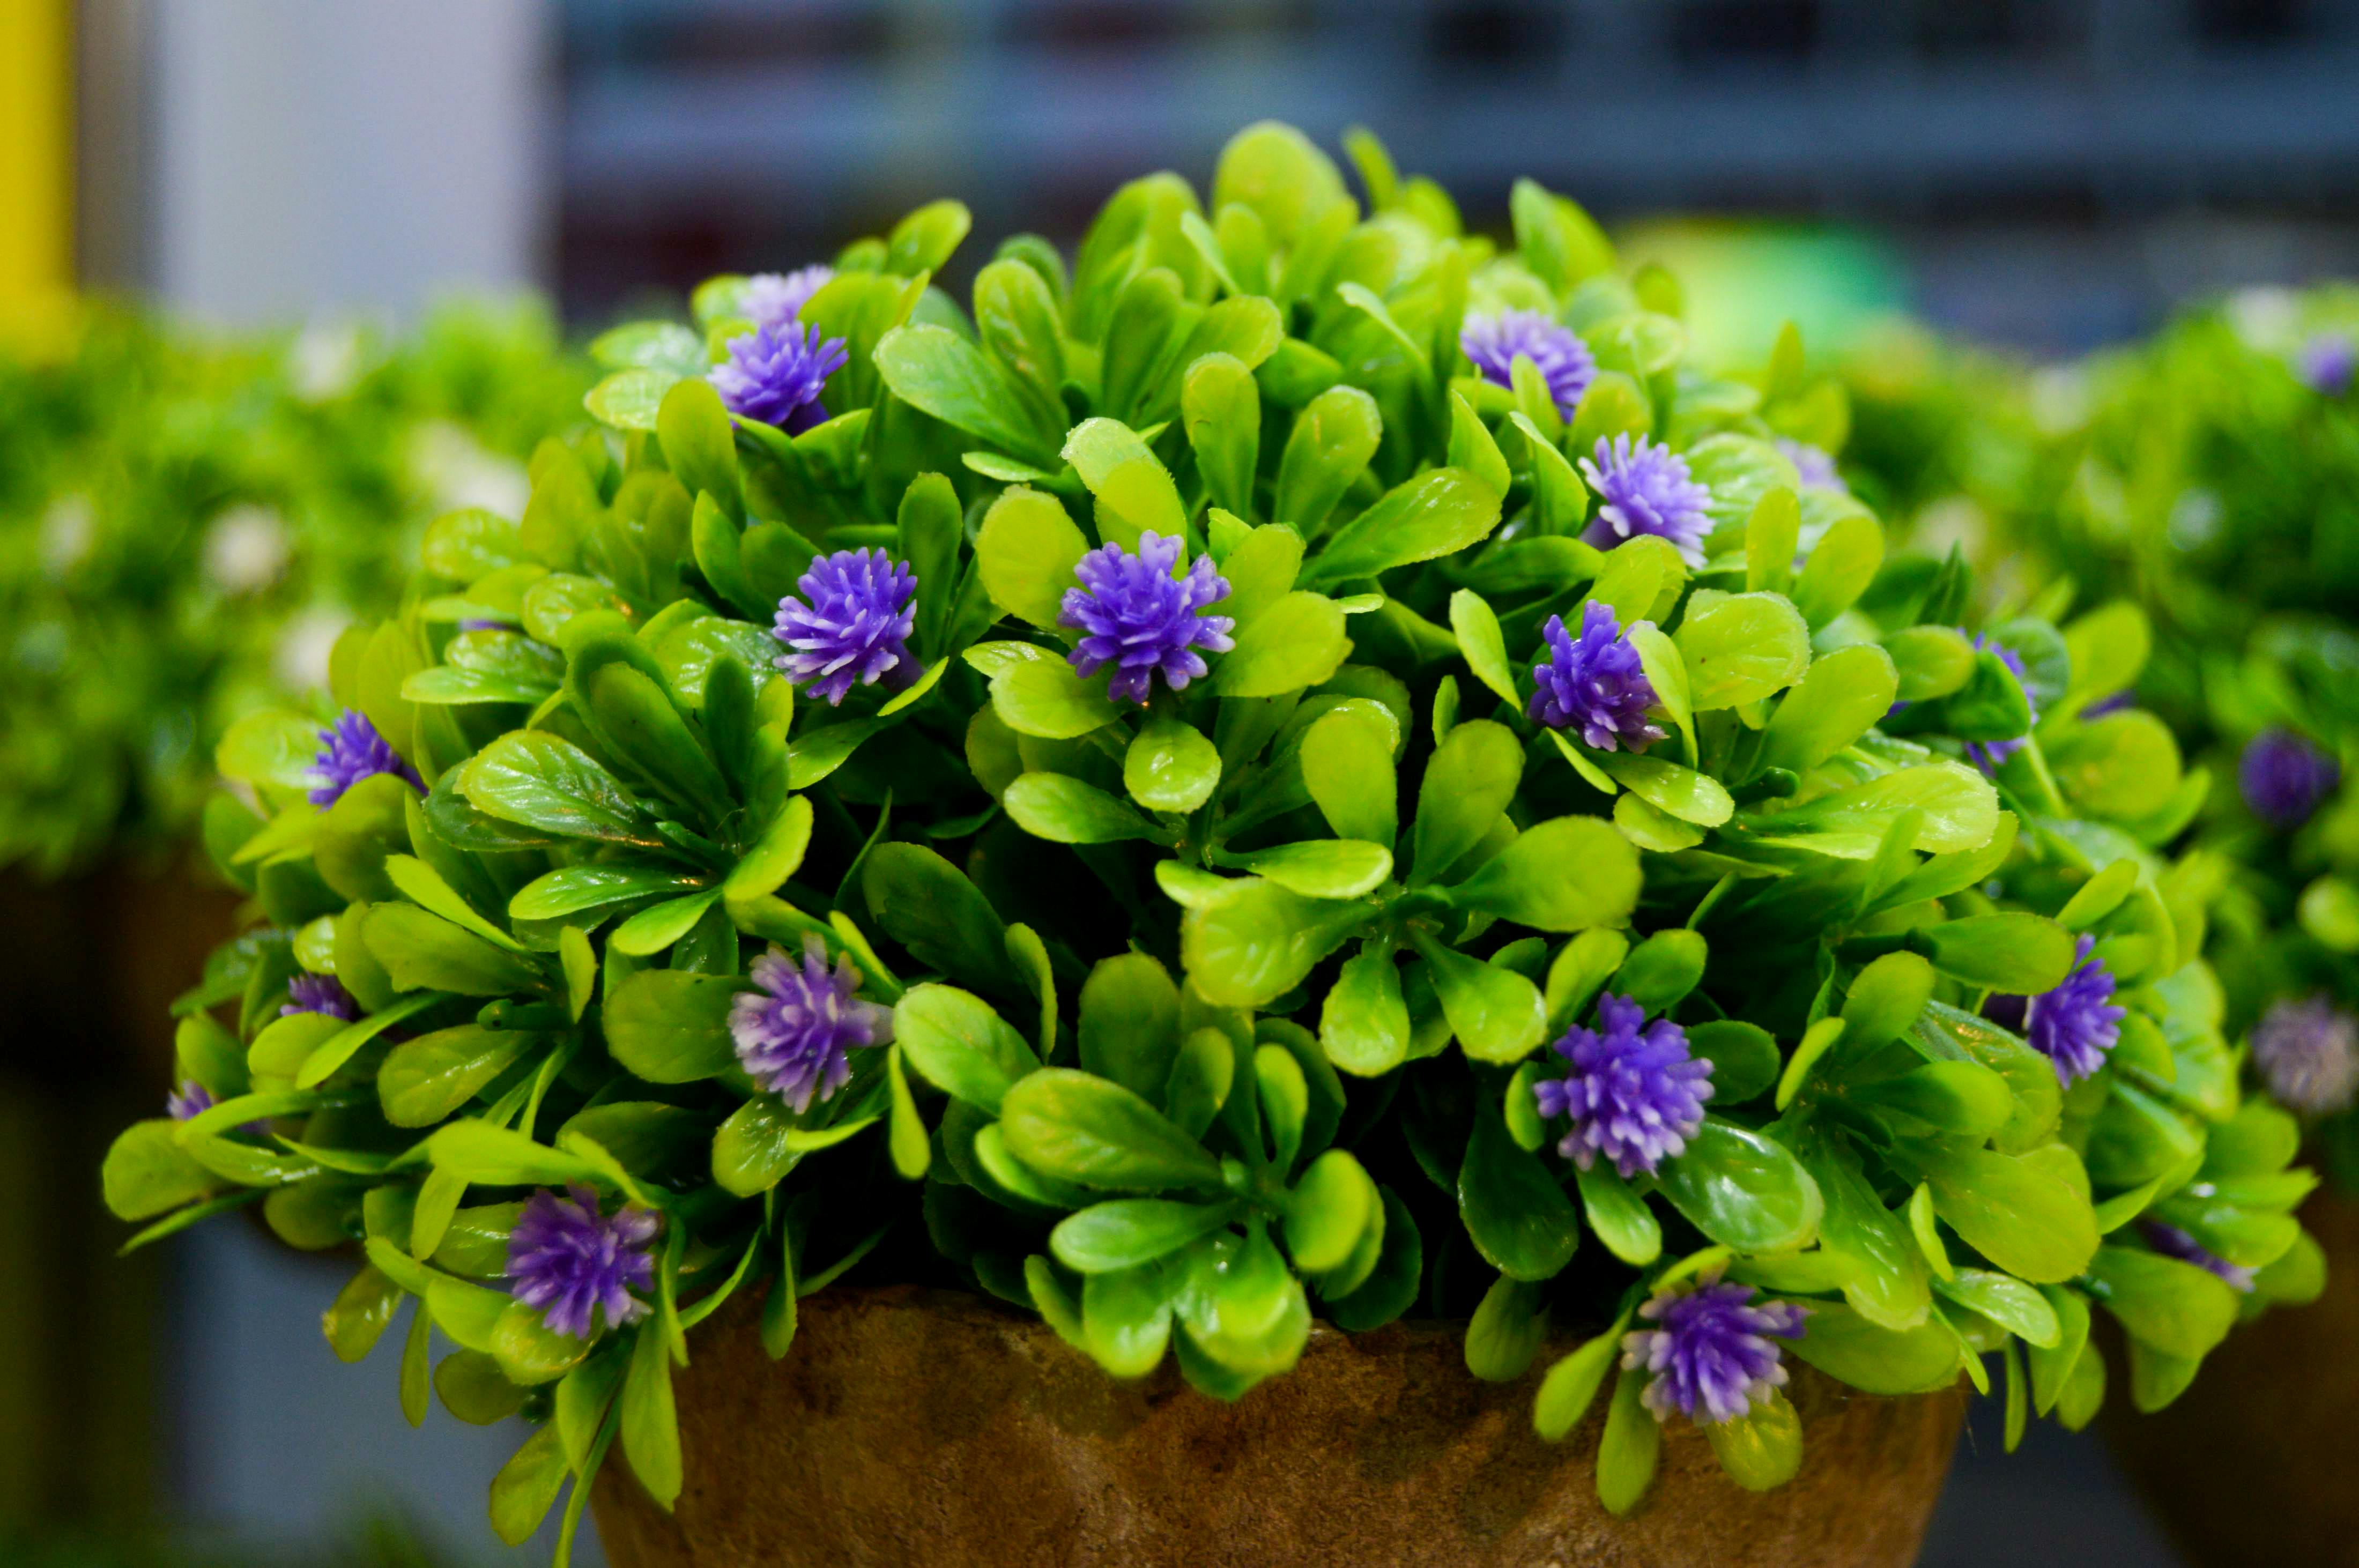 plant with purple flowers and green leaves